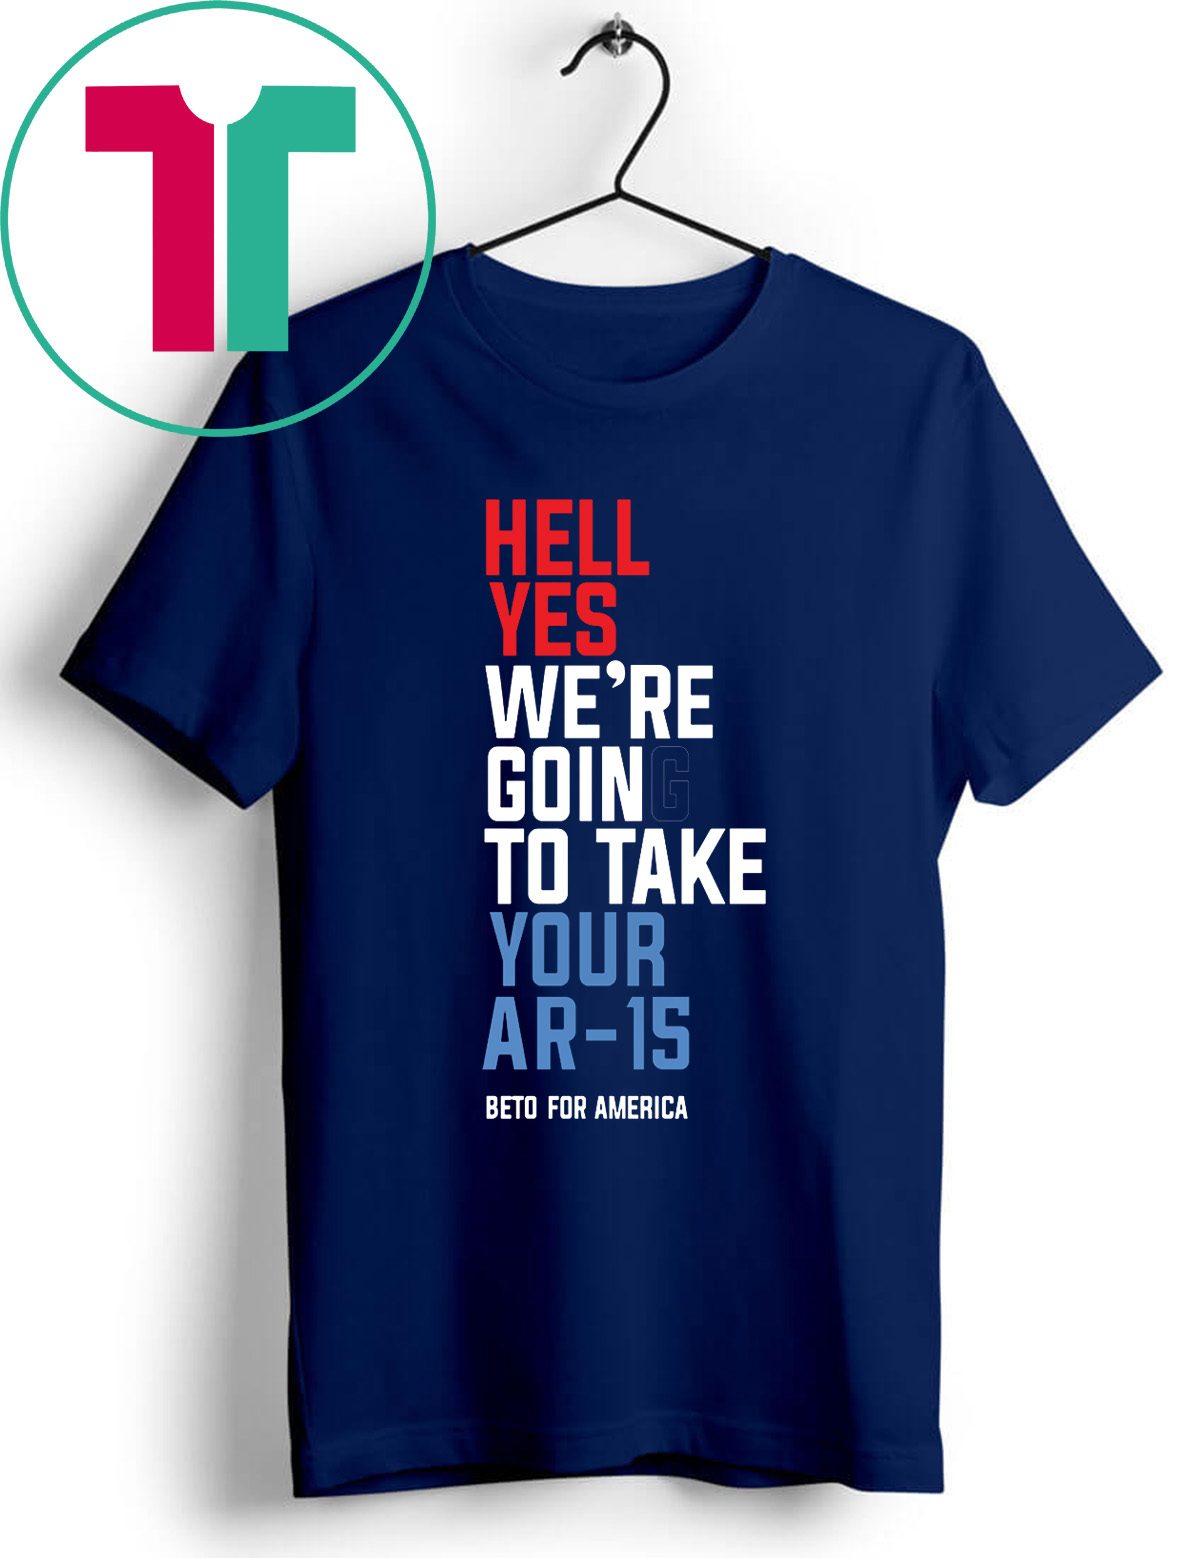 Beto Hell Yes We’re Going To Take Your Ar-15 T-Shirt - Reviewshirts Office